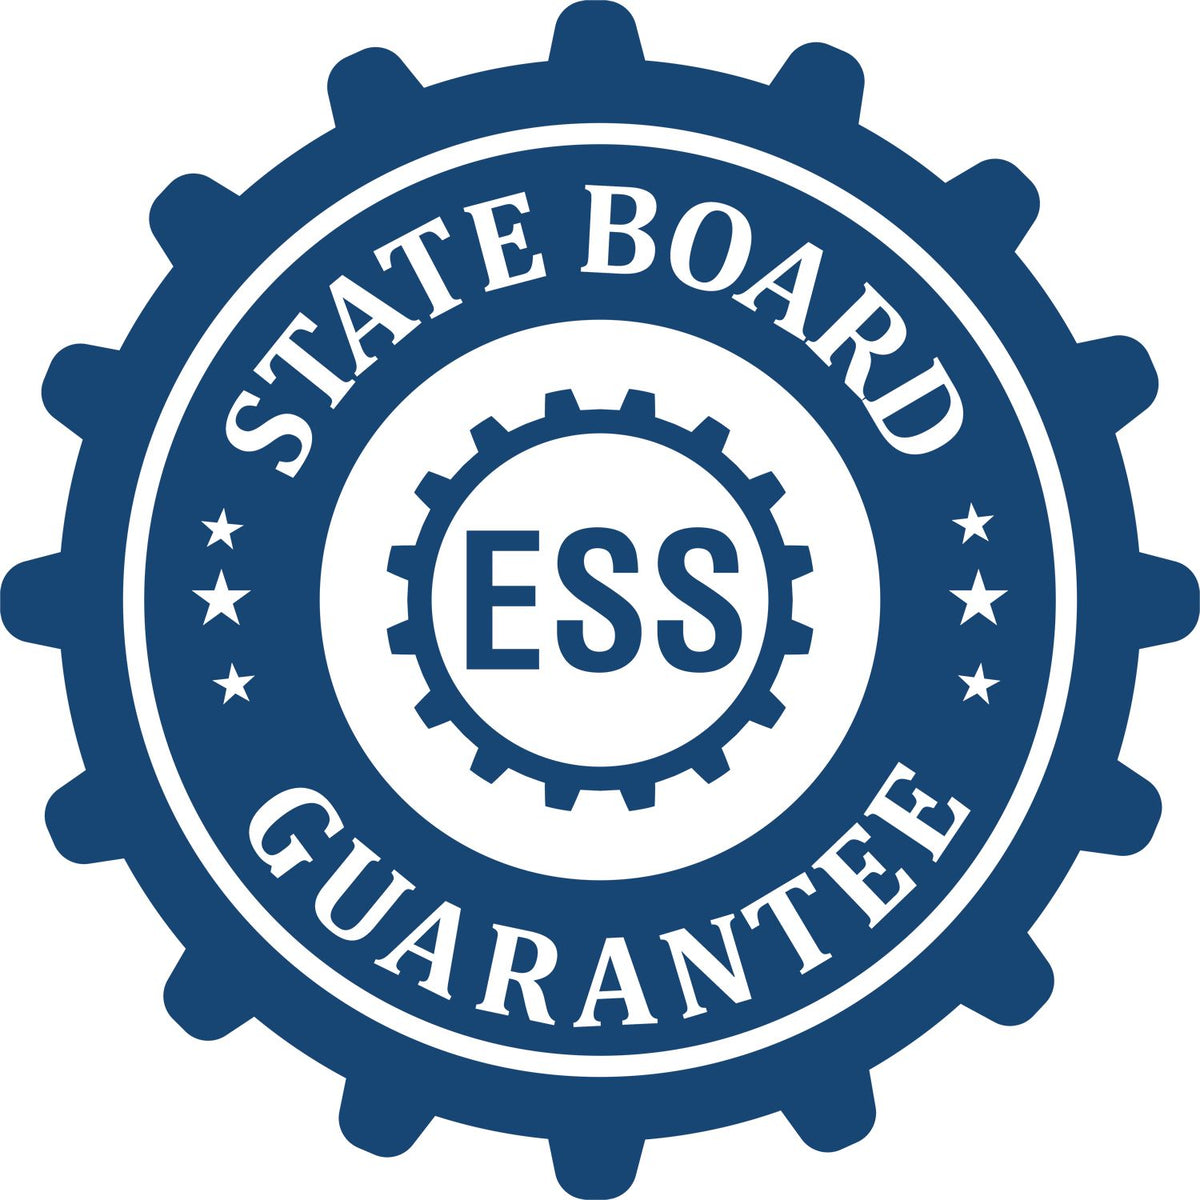 An emblem in a gear shape illustrating a state board guarantee for the Digital District of Columbia PE Stamp and Electronic Seal for District of Columbia Engineer product.